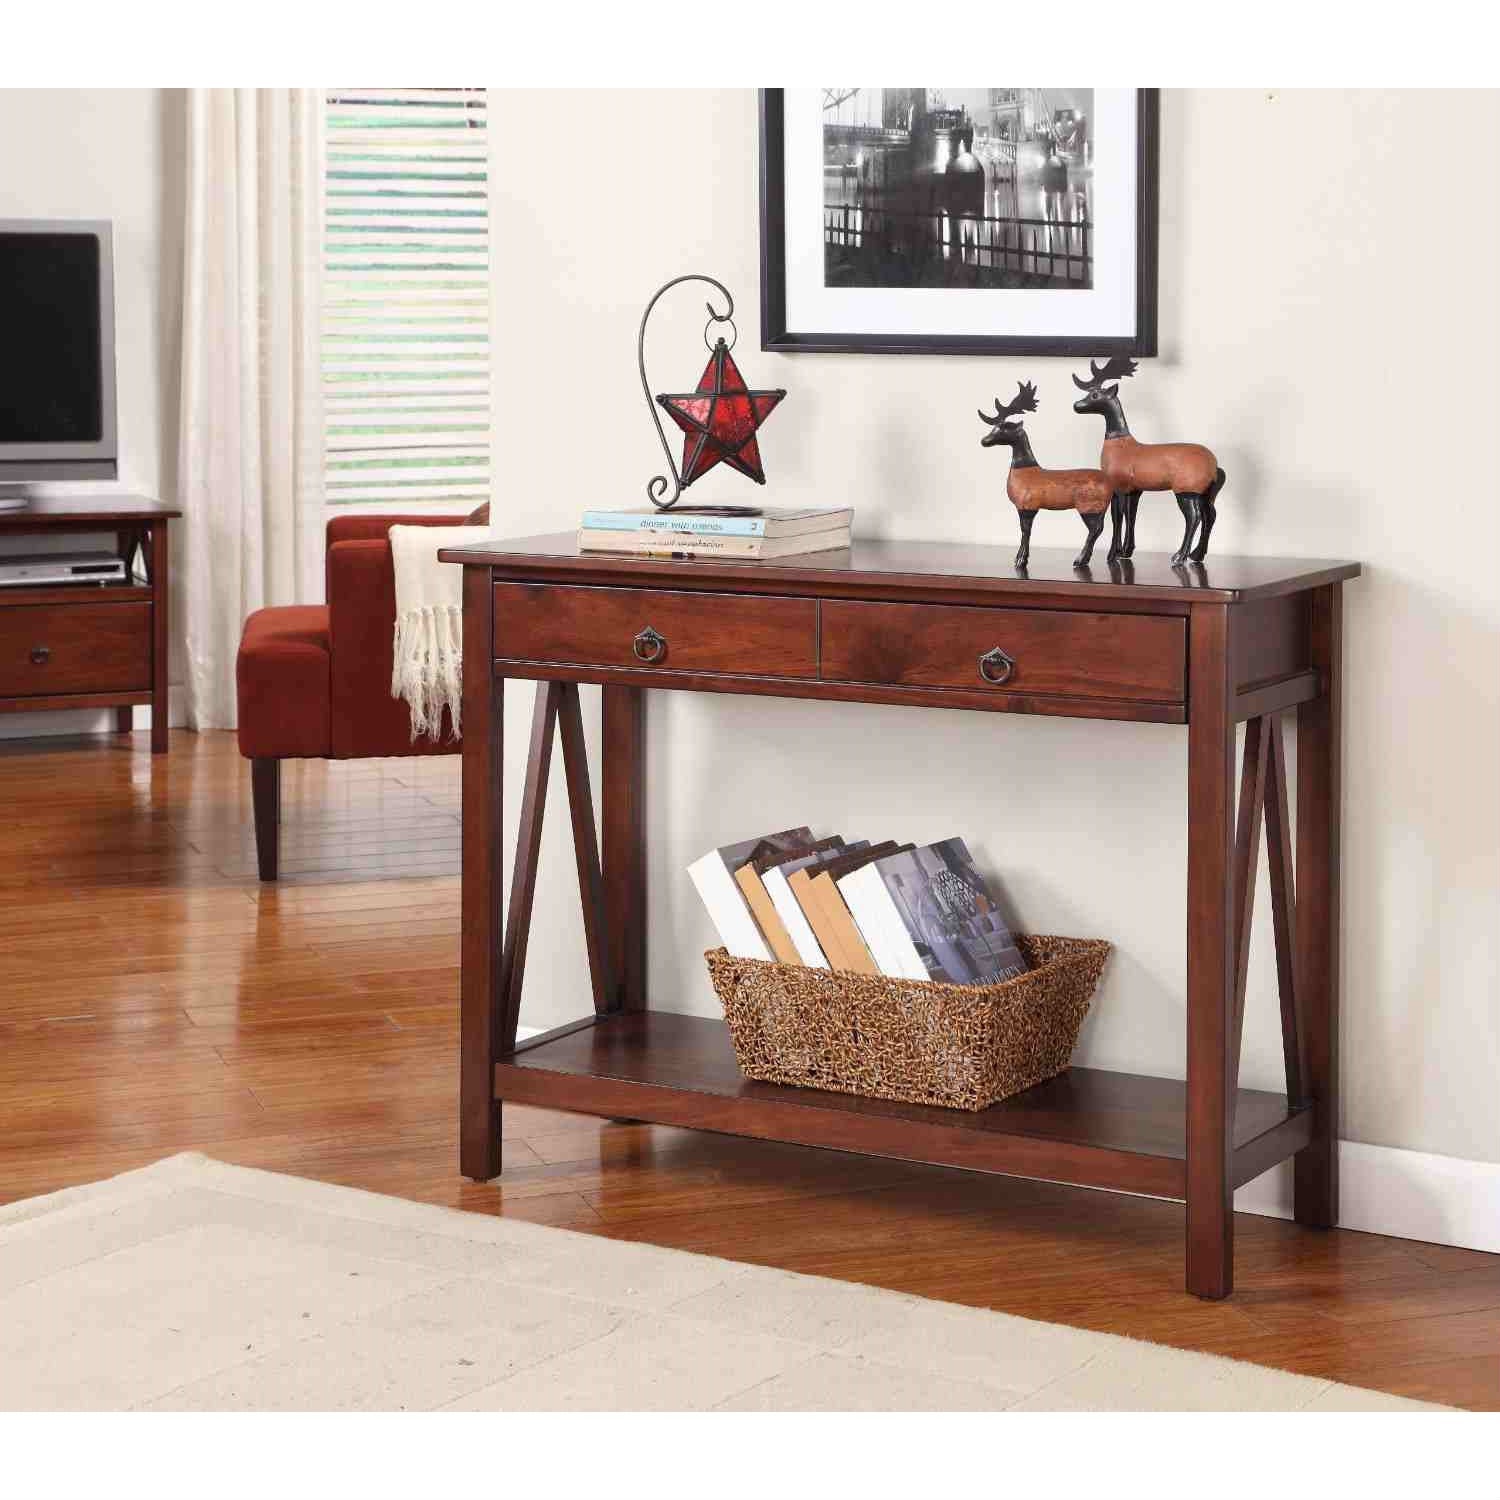 2-Drawer Console Sofa Table Living Room Storage Shelf in Tobacco Brown-Novel Home